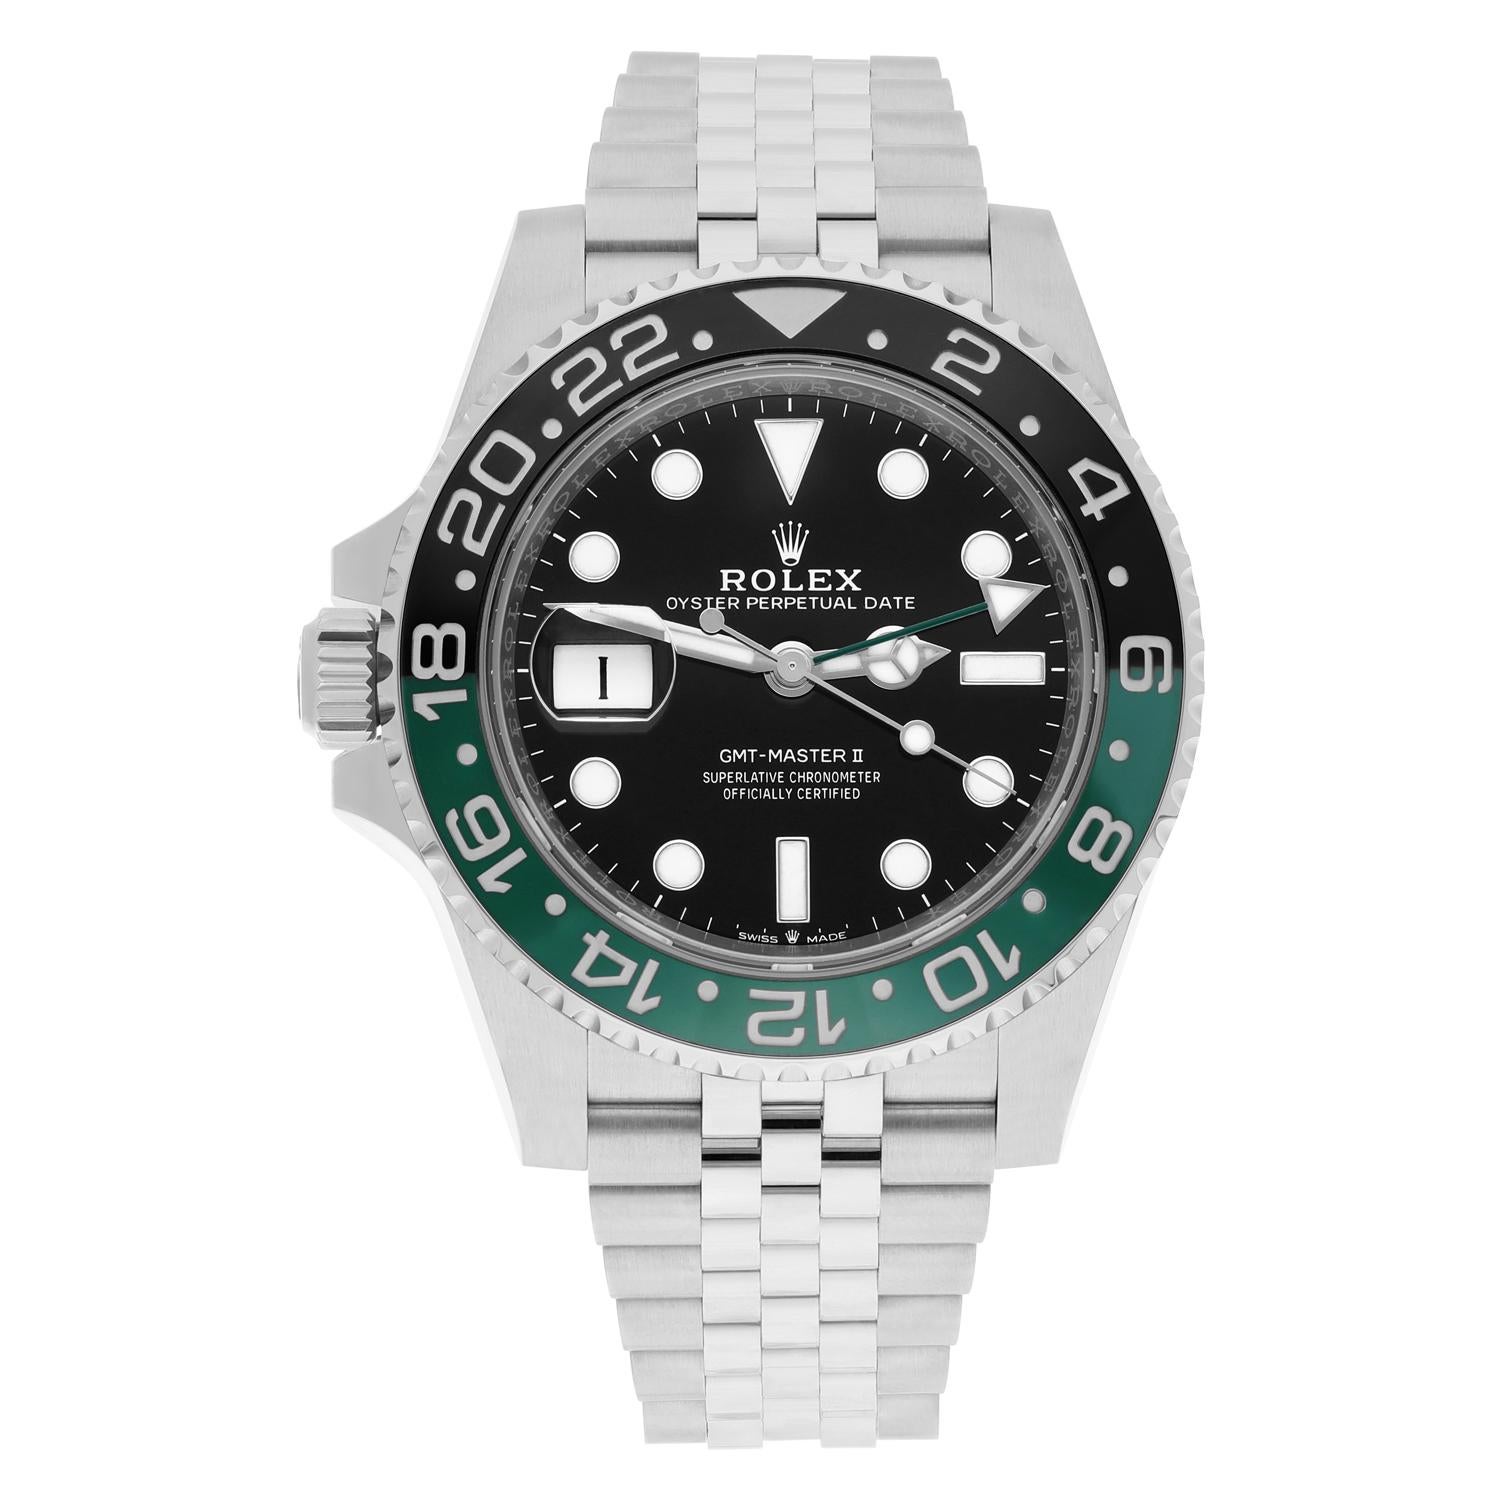 The Rolex GMT-Master II 126720VTNR “Sprite” is a genuine Rolex watch model that is known for its unique left-handed configuration and distinct design. It has a black dial and a two-color Cerachrom bezel insert in green and black ceramic. The watch